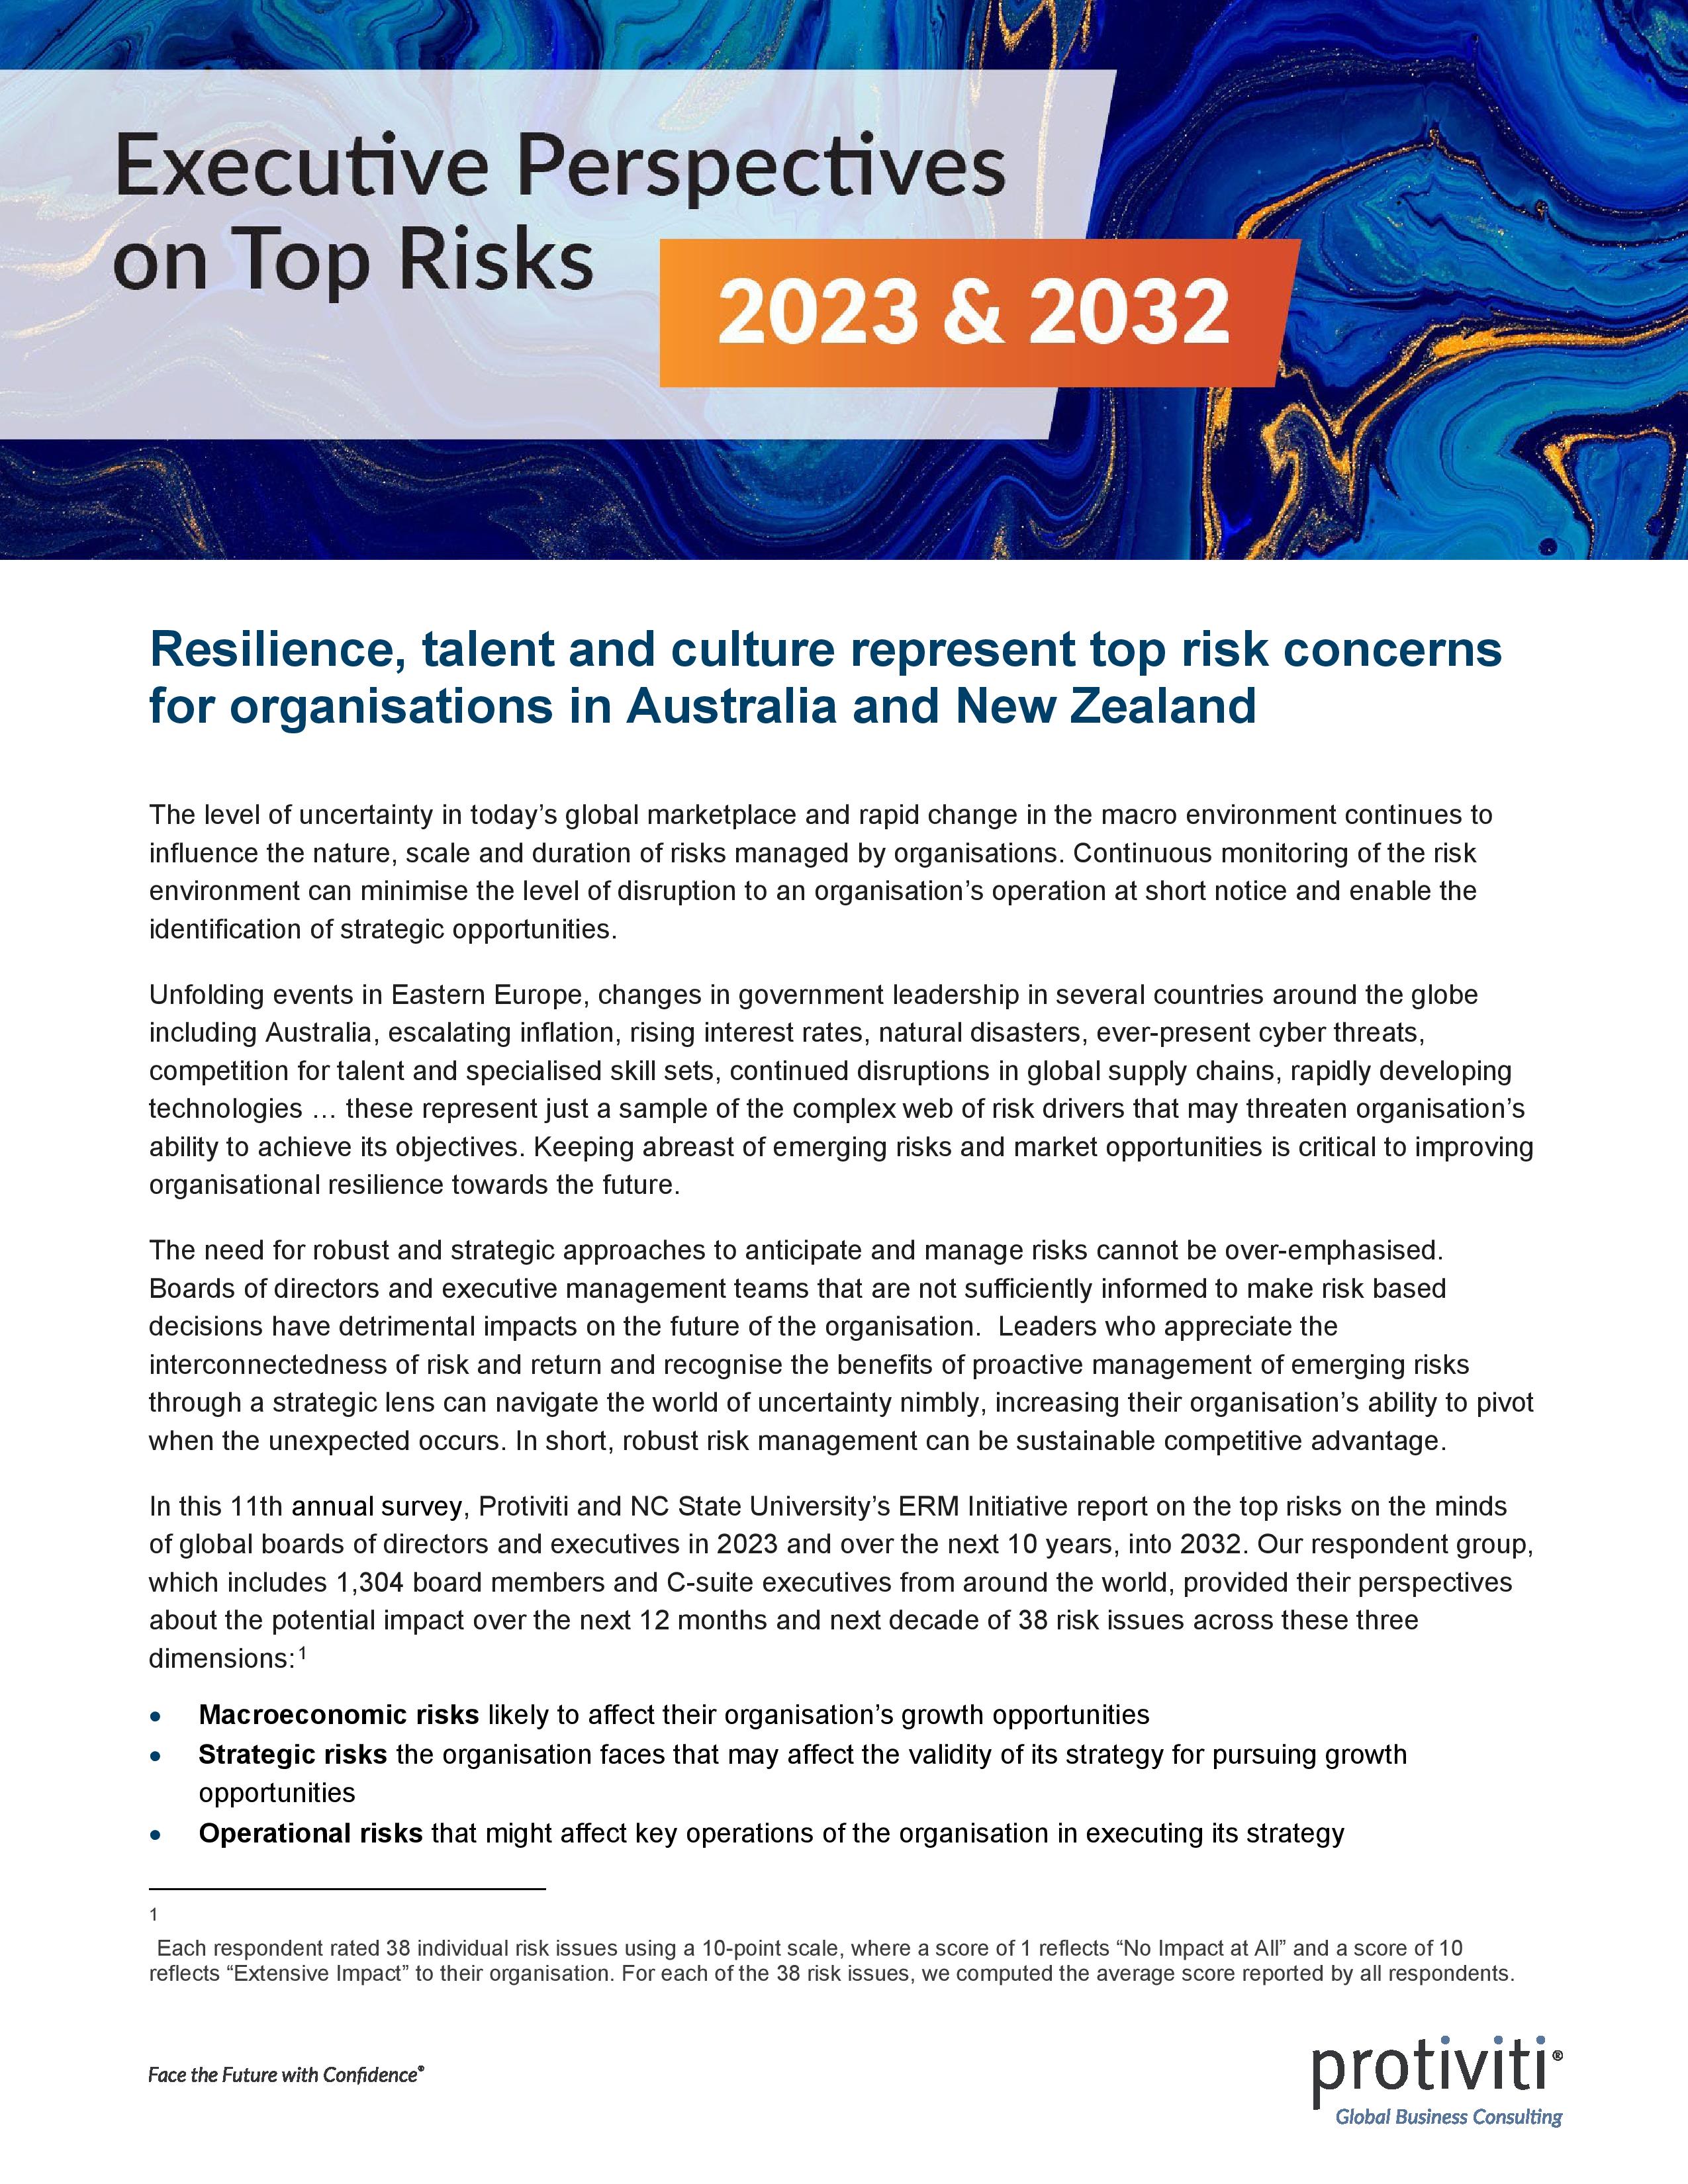 Screenshot of the first page of Executive Perspectives on Top Risks in 2023 and 2032 Australia and New Zealand Results